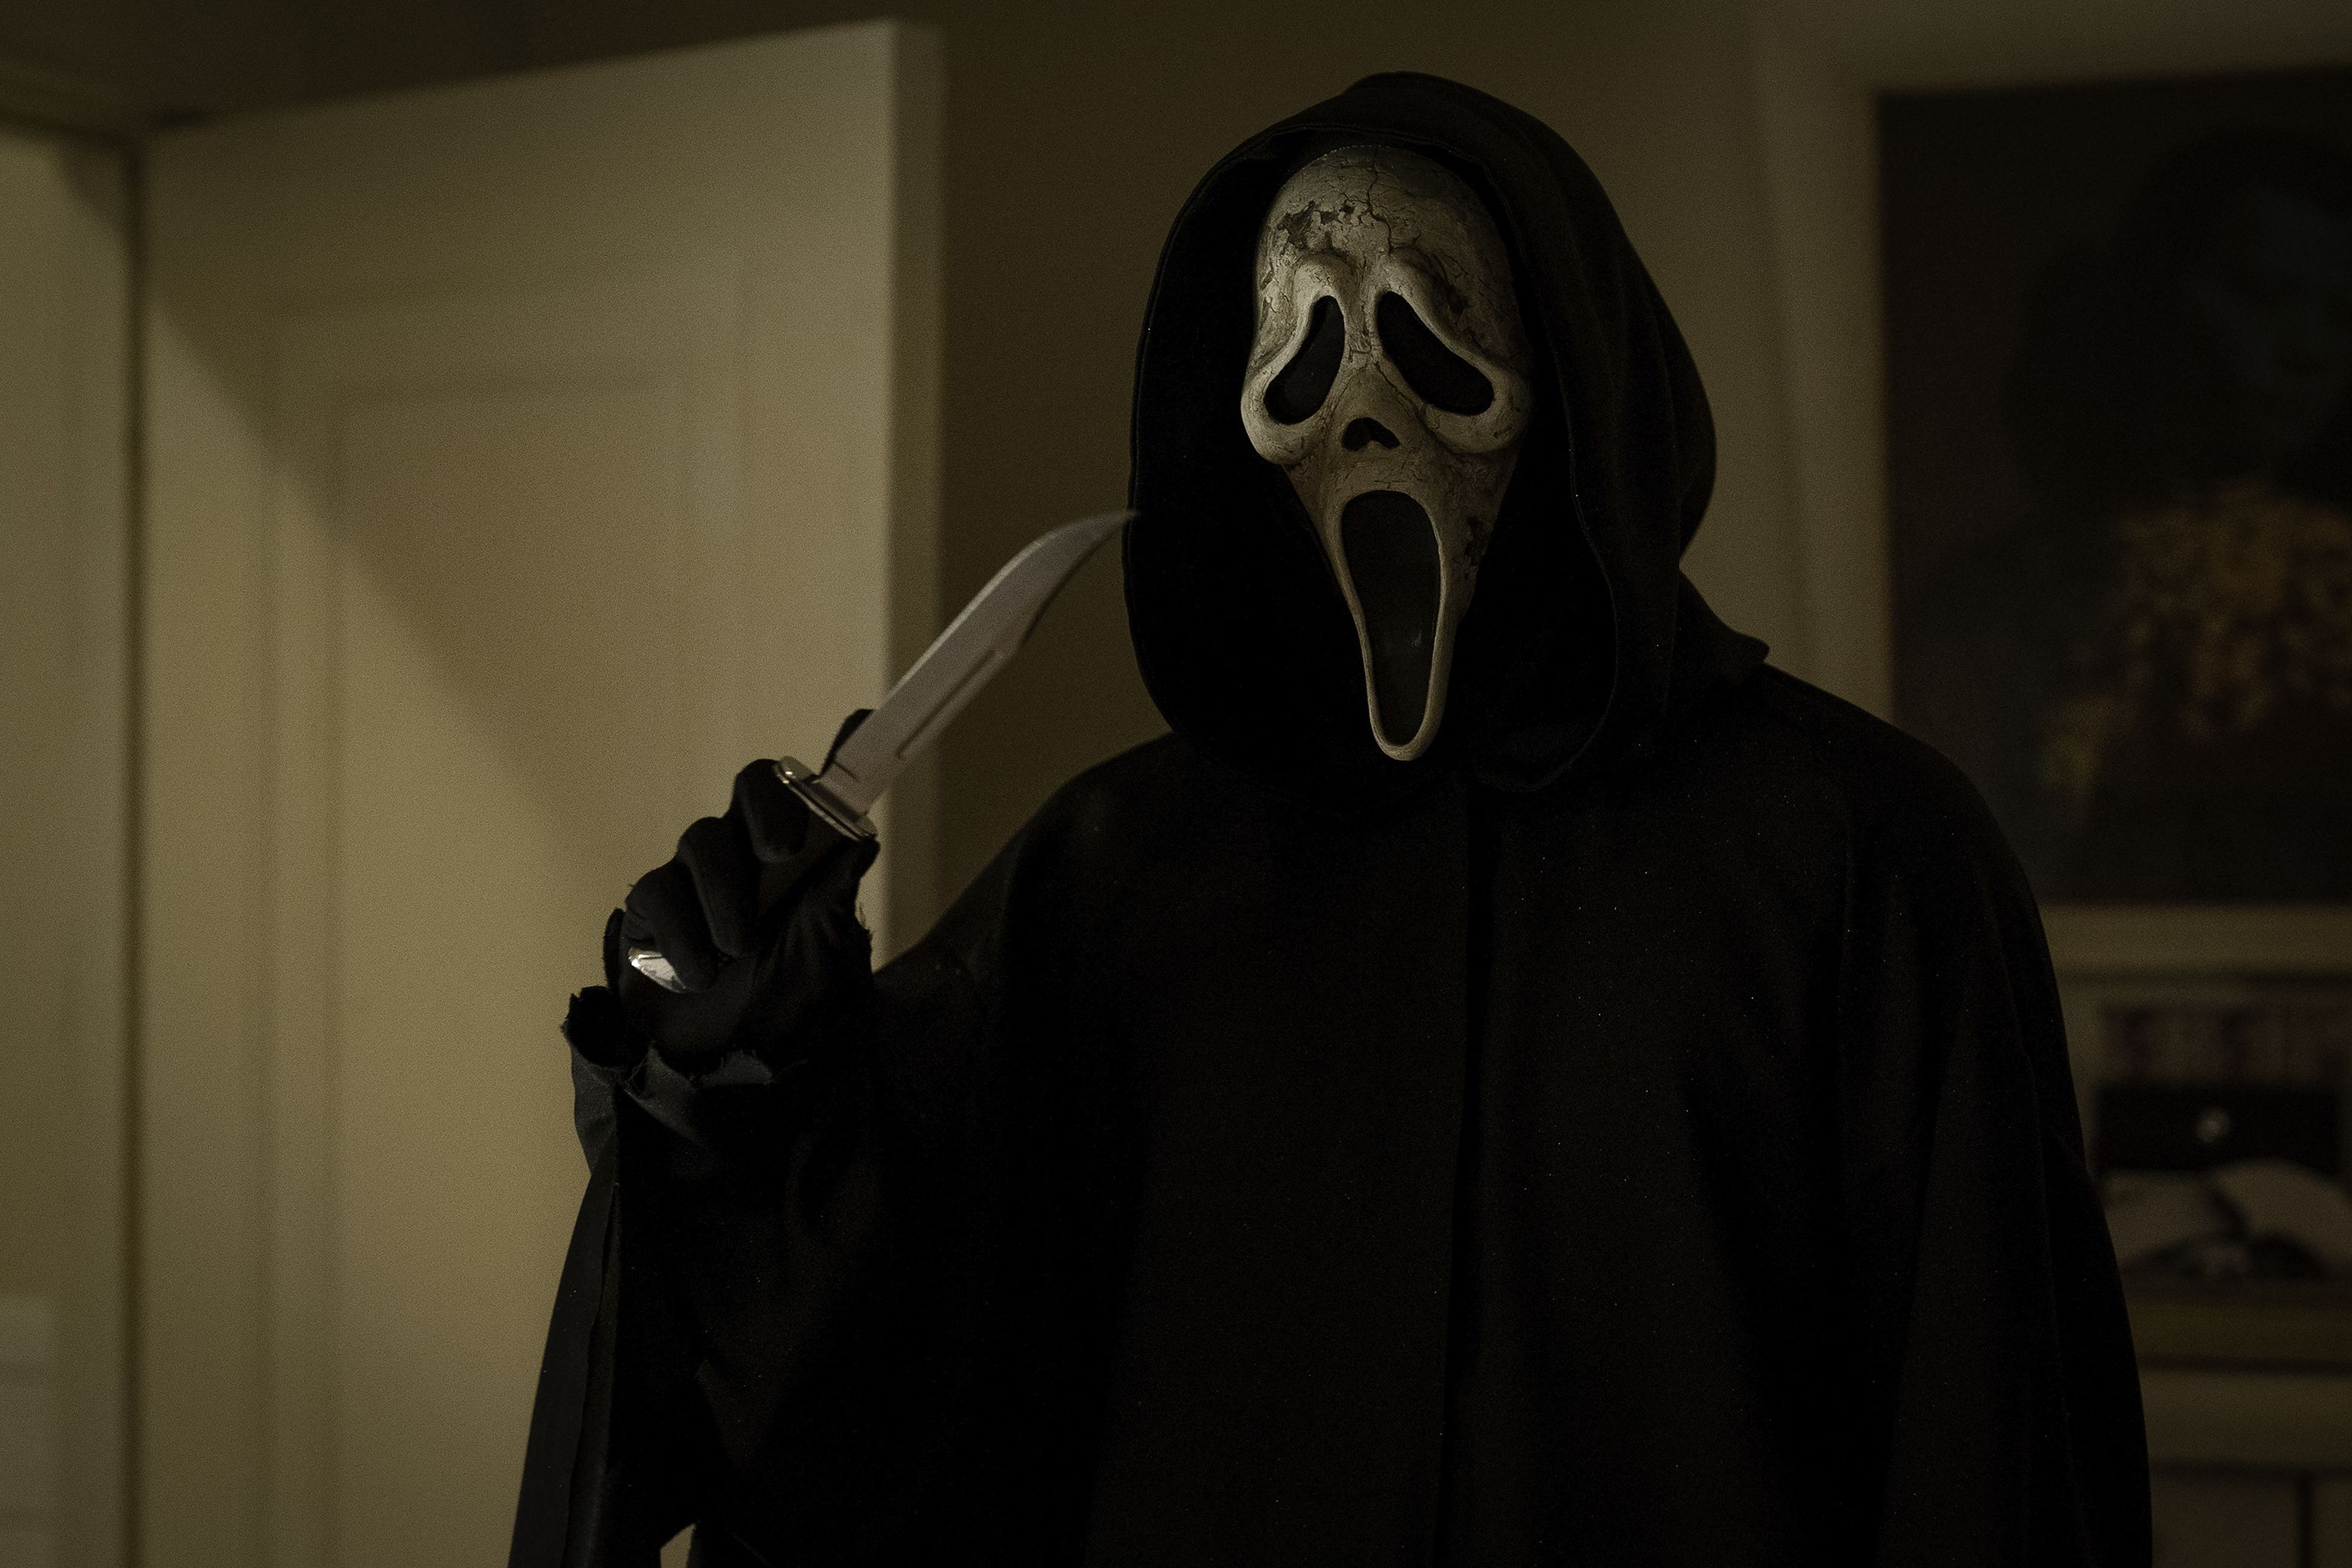 A classic horror movie comes back to make you “Scream” this weekend